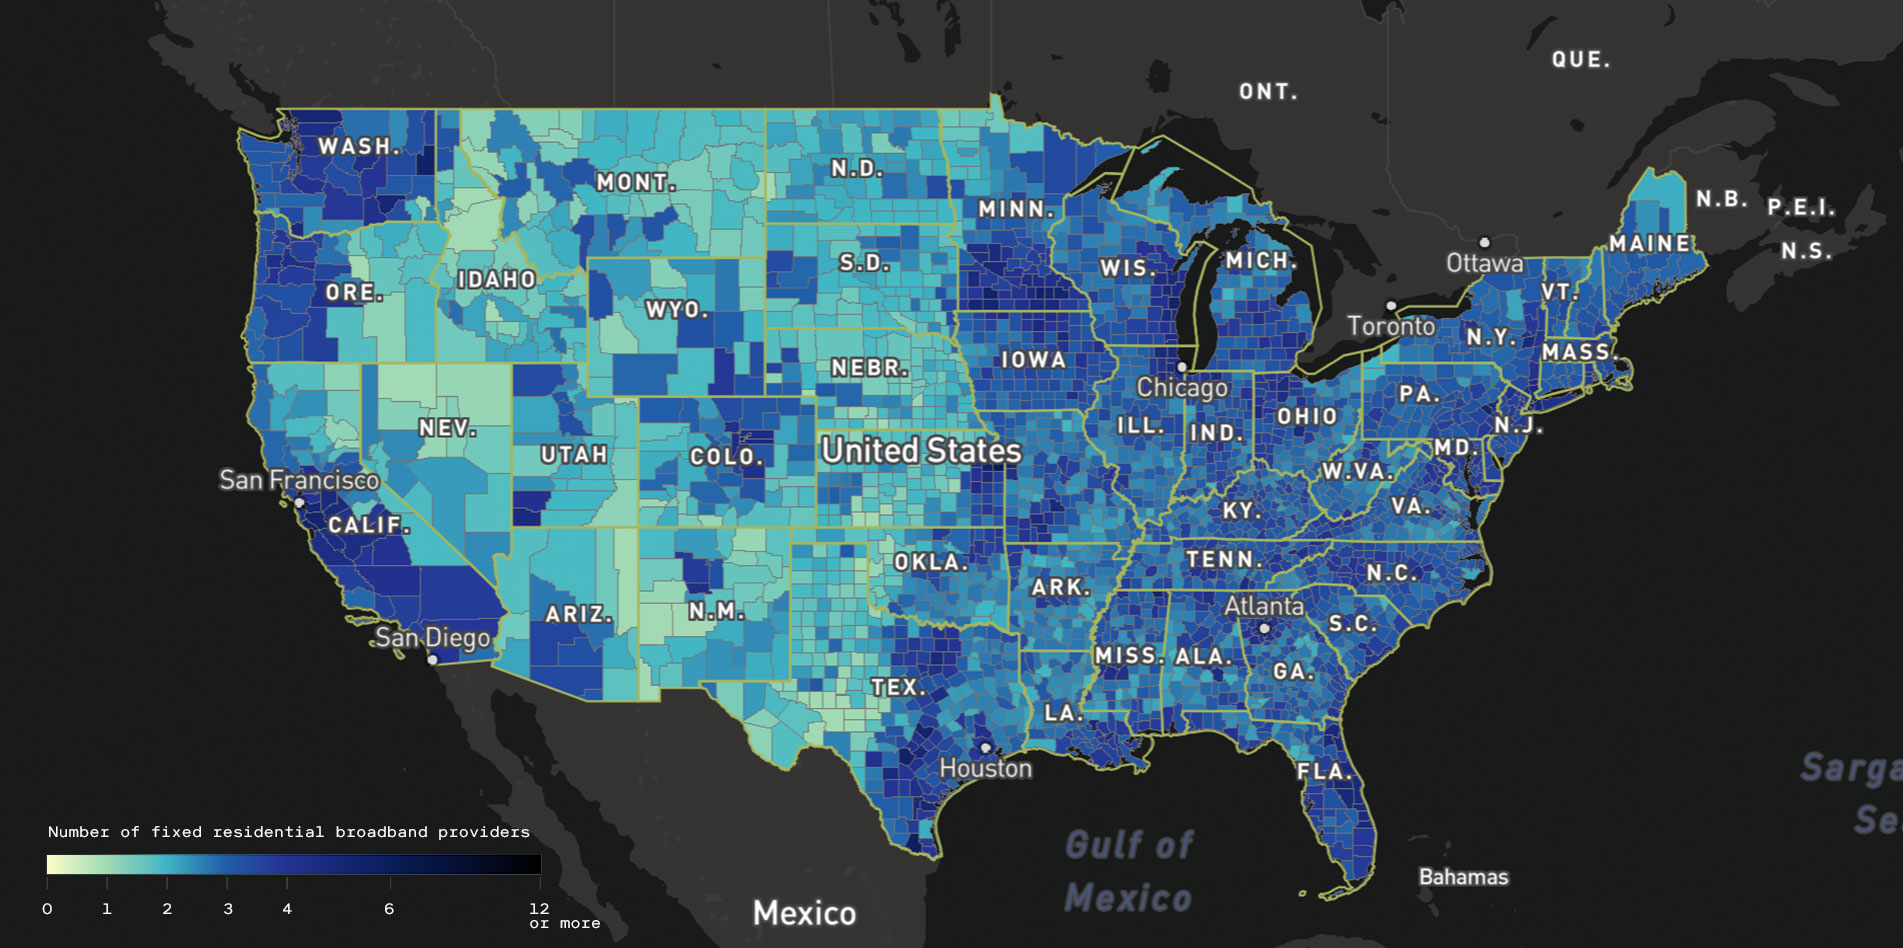 Choropleth map of the continental US